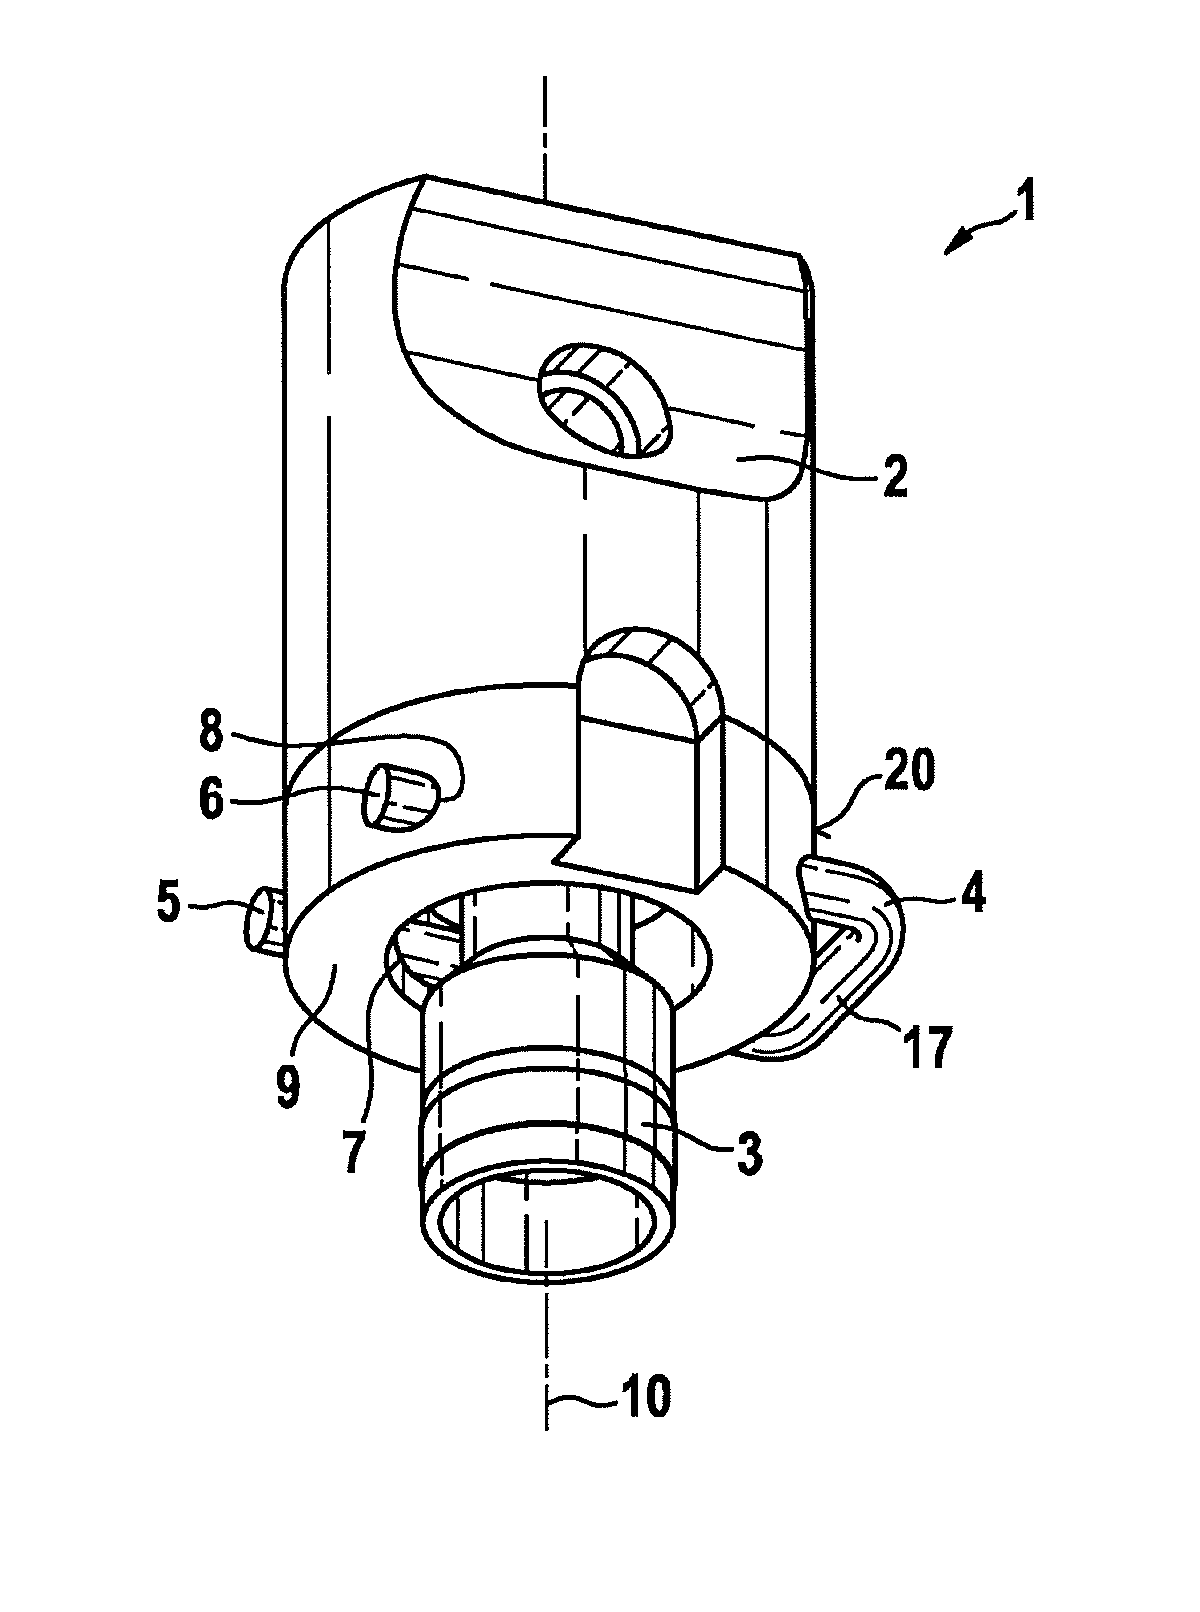 System having a fuel distributor and multiple fuel injectors